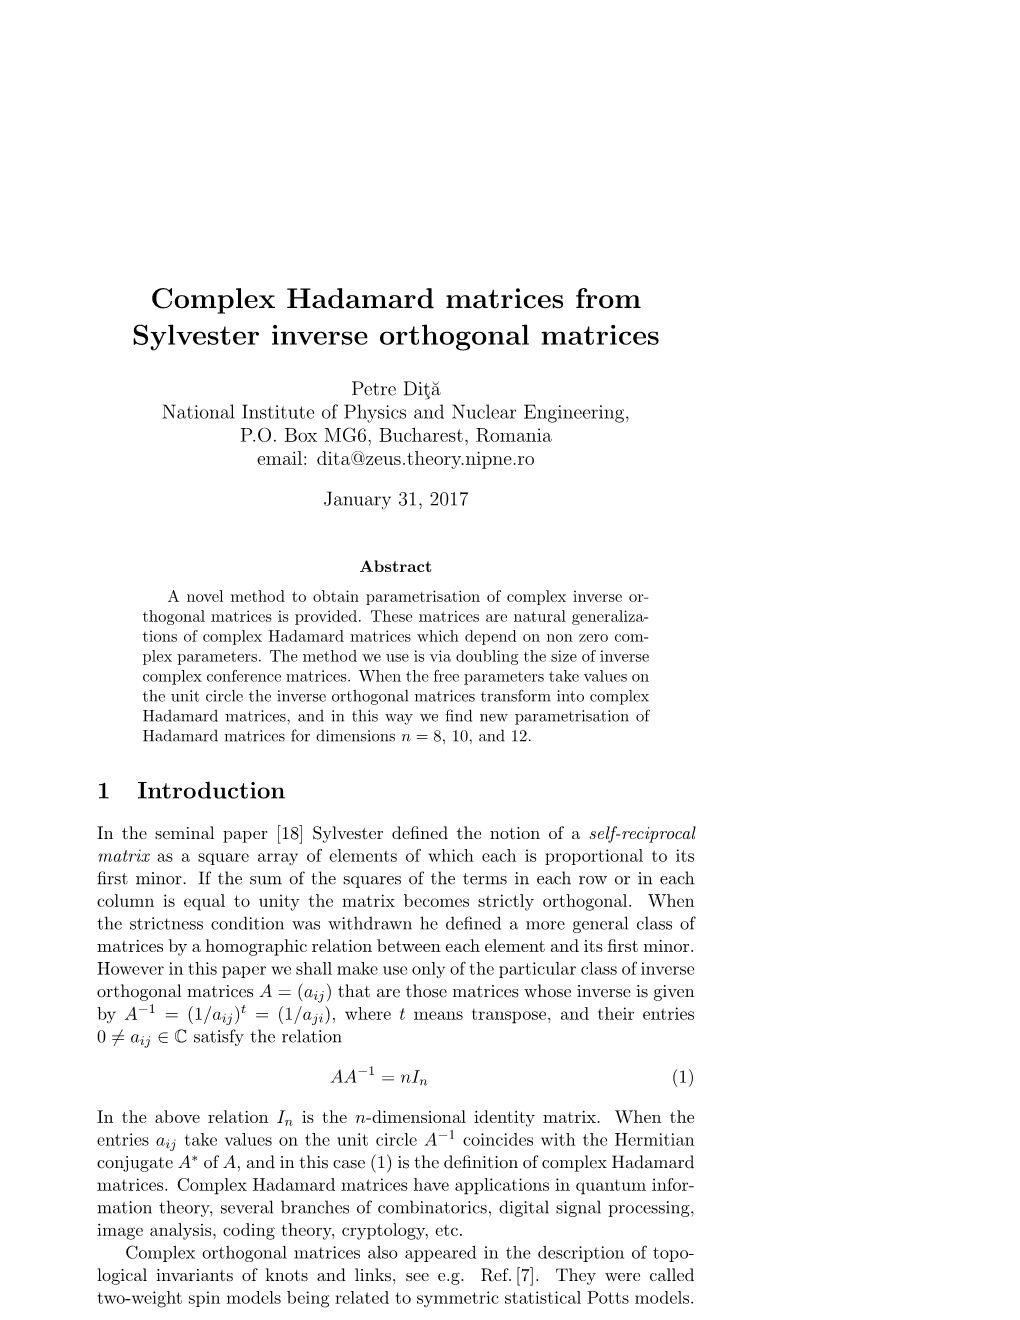 Complex Hadamard Matrices from Sylvester Inverse Orthogonal Matrices